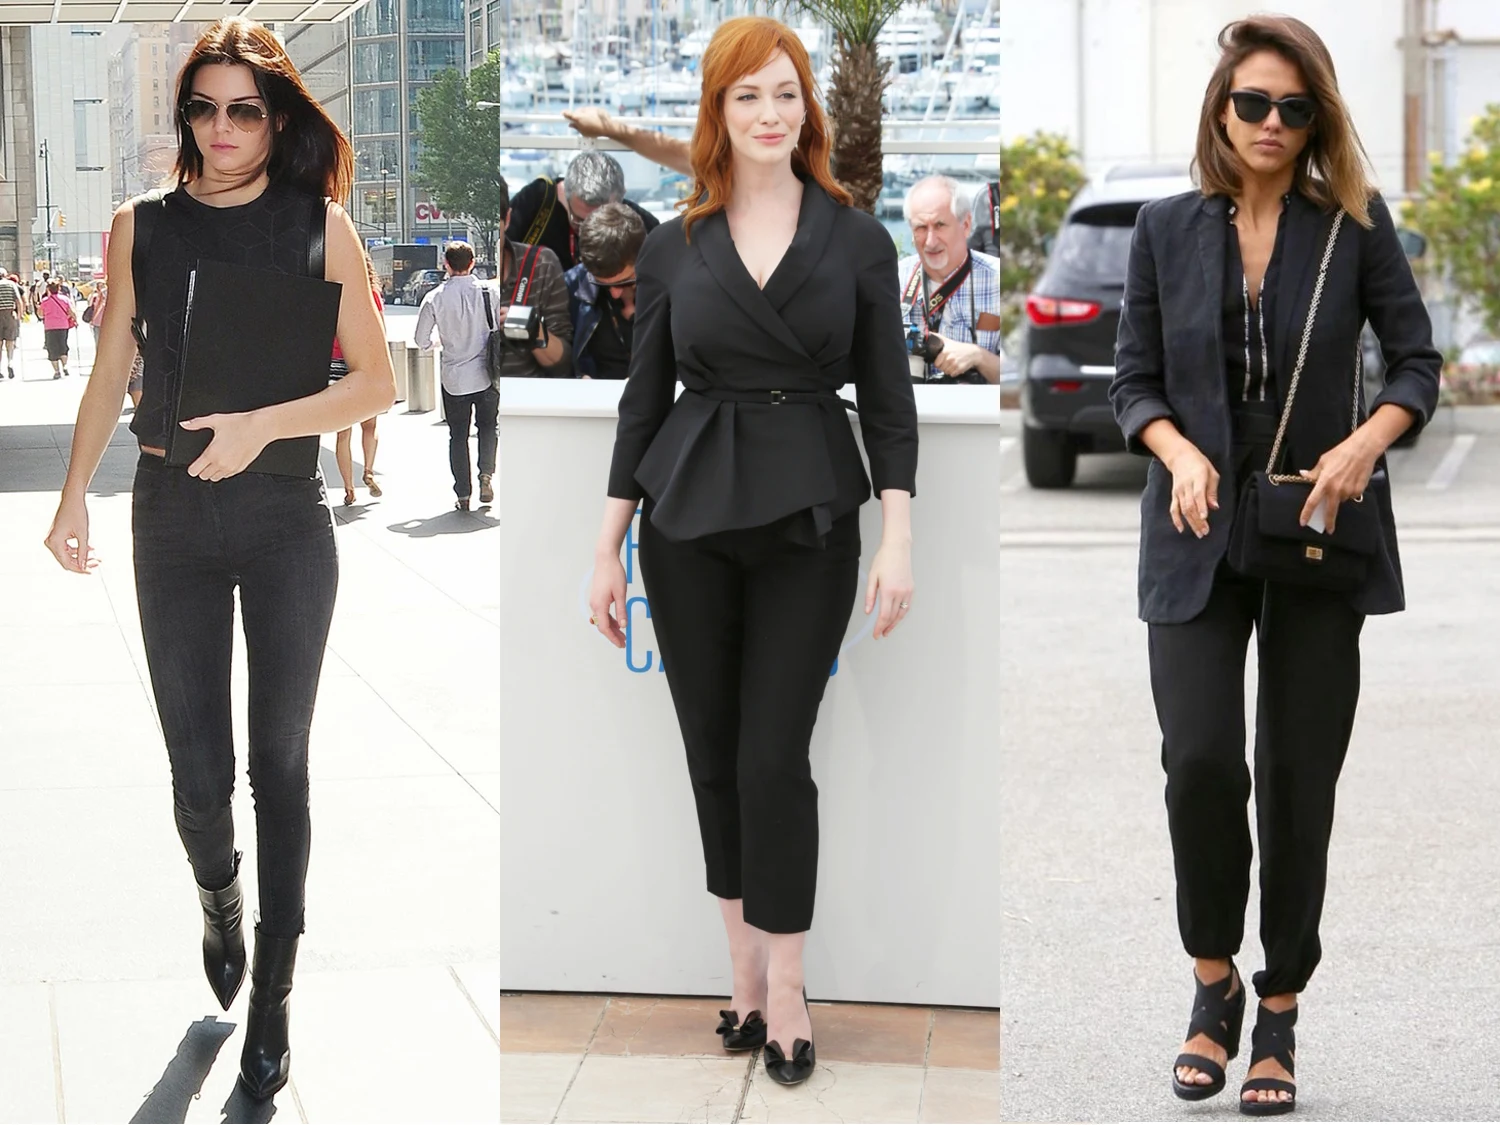 fashion collage with celebrities in all black outfits Left to right: Kendall Jenner, Christina Hendricks, Jessica Alba: